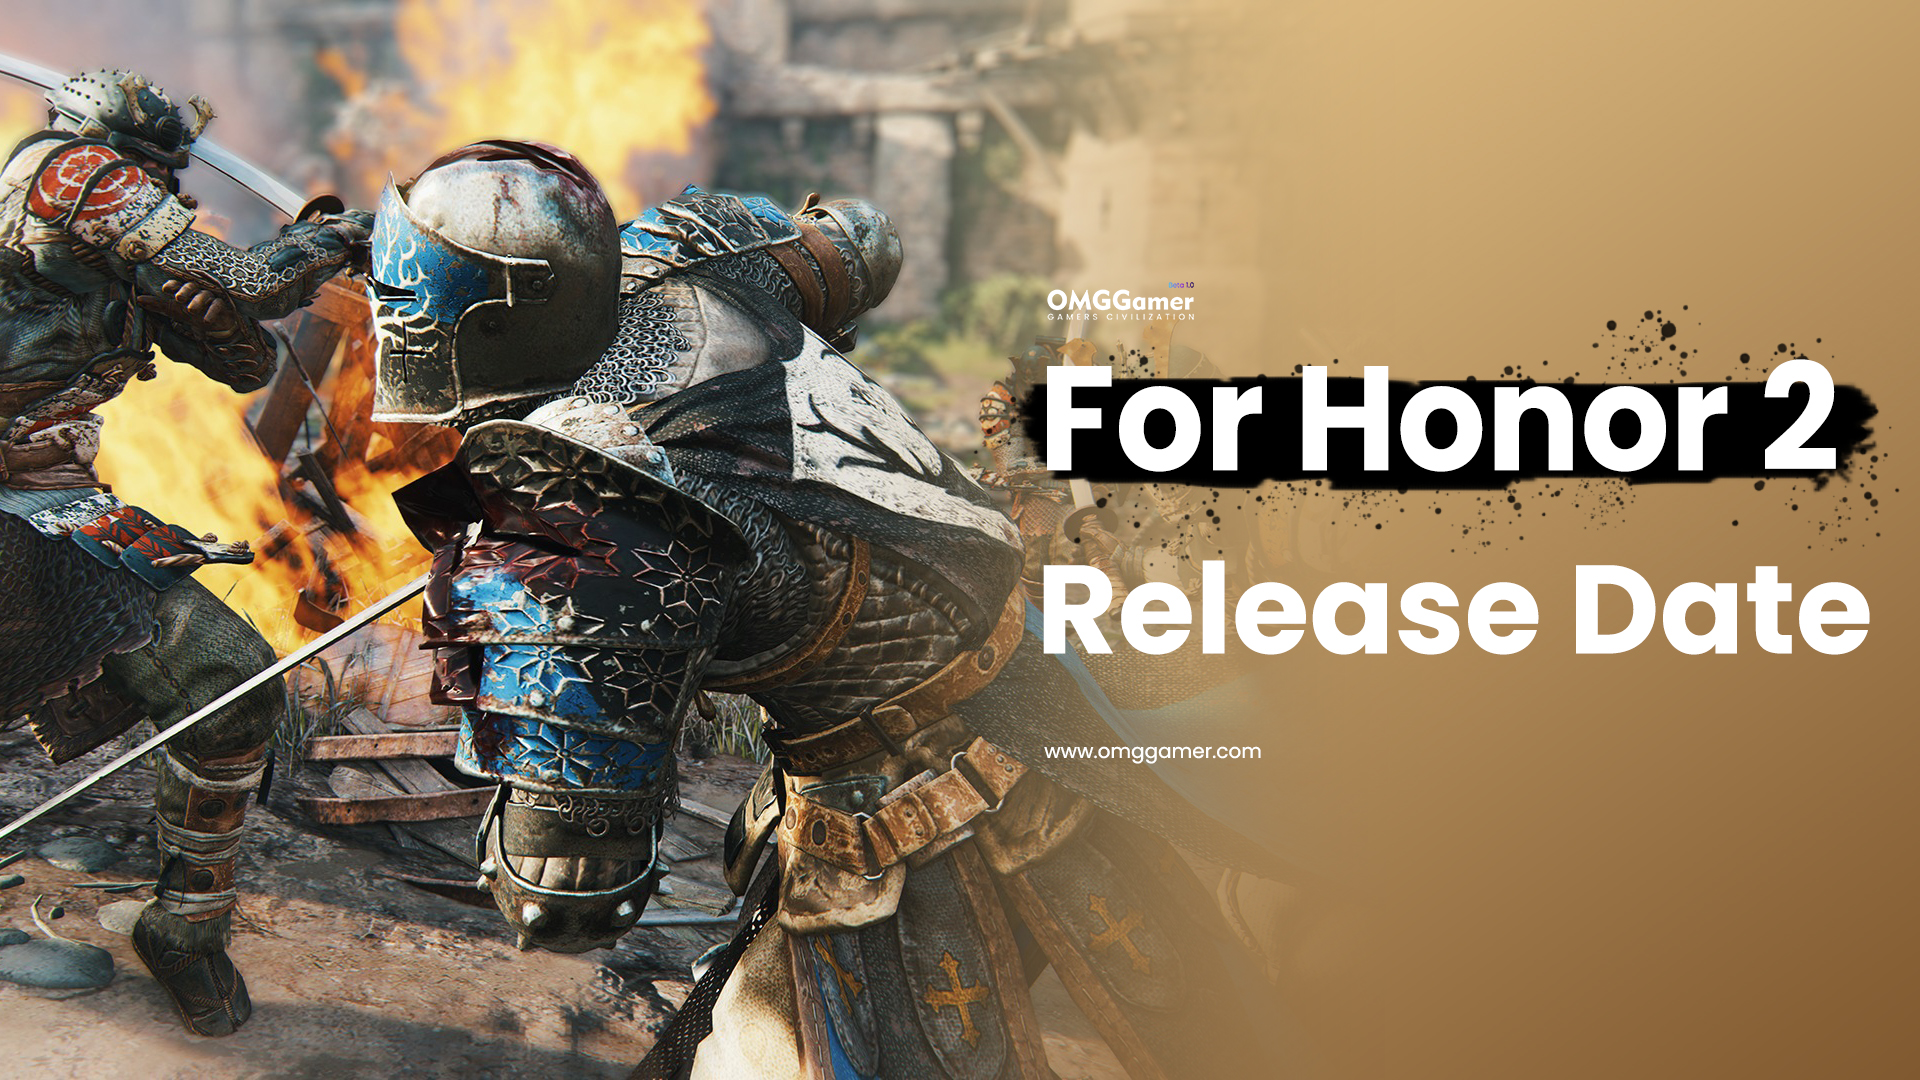 For Honor 2 Release Date